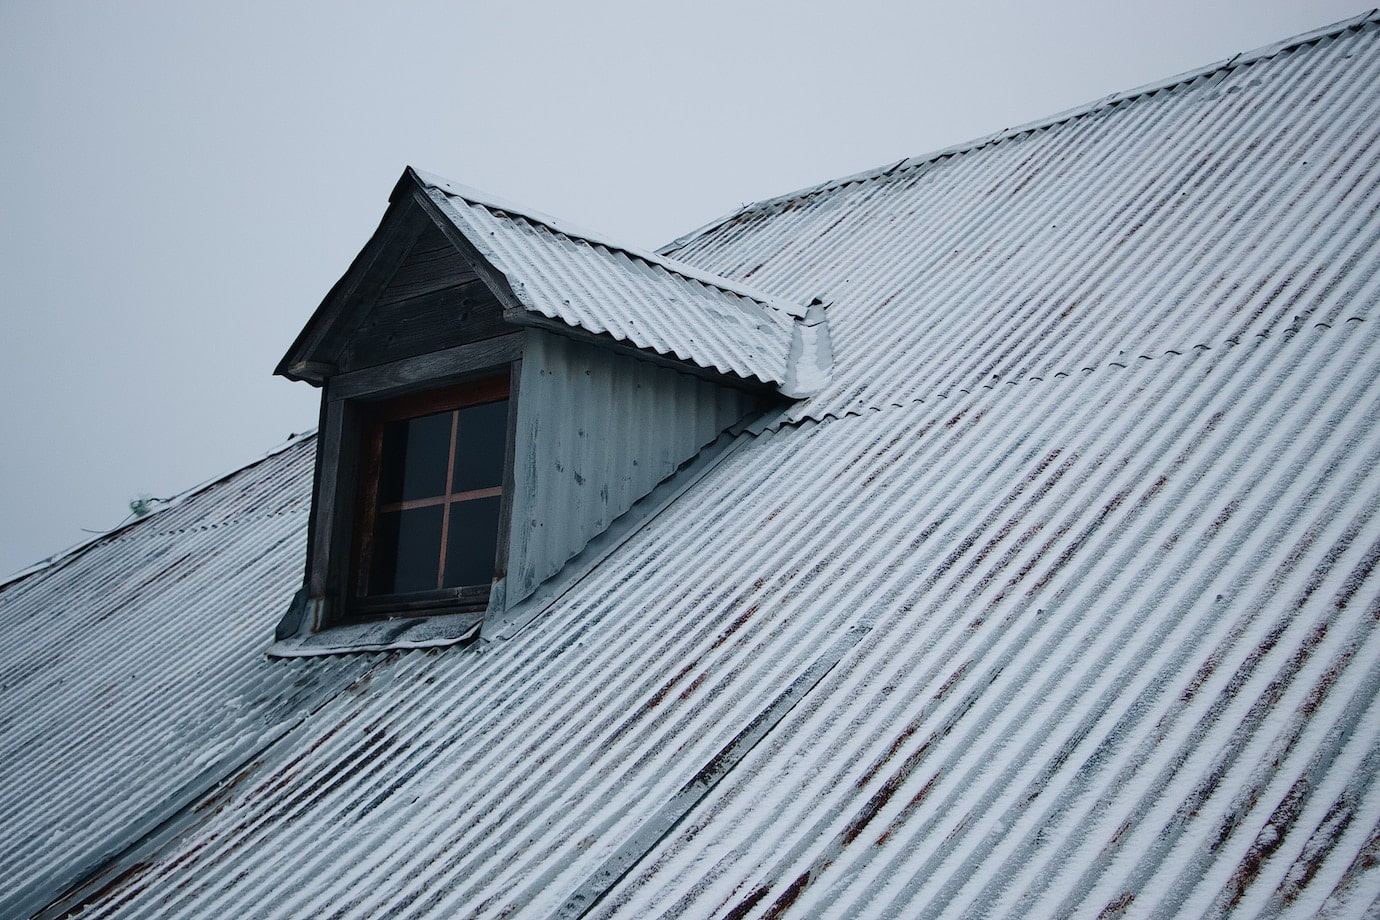 Factors to Consider When Choosing the Right Roofing Contractor for Storm Damage Repairs